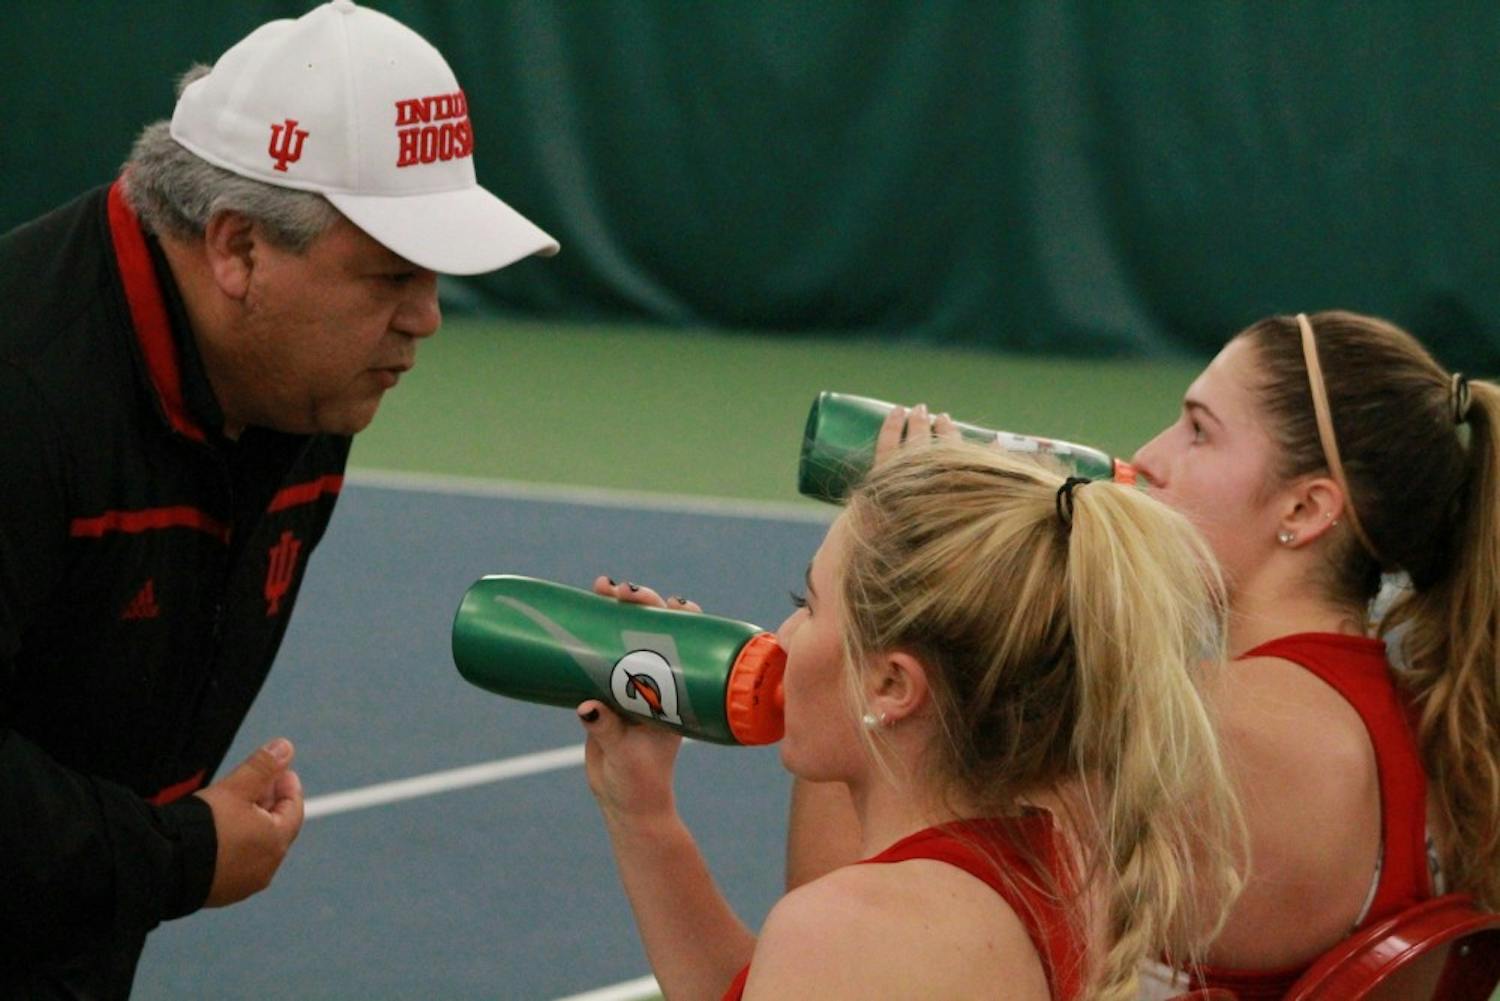 Head coach Ramiro Azcui talks with then-sophomores, now juniors, Madison Appel and Natalie Whalen in February at a match against DePaul. This will be Azcui's second season as head coach.&nbsp;